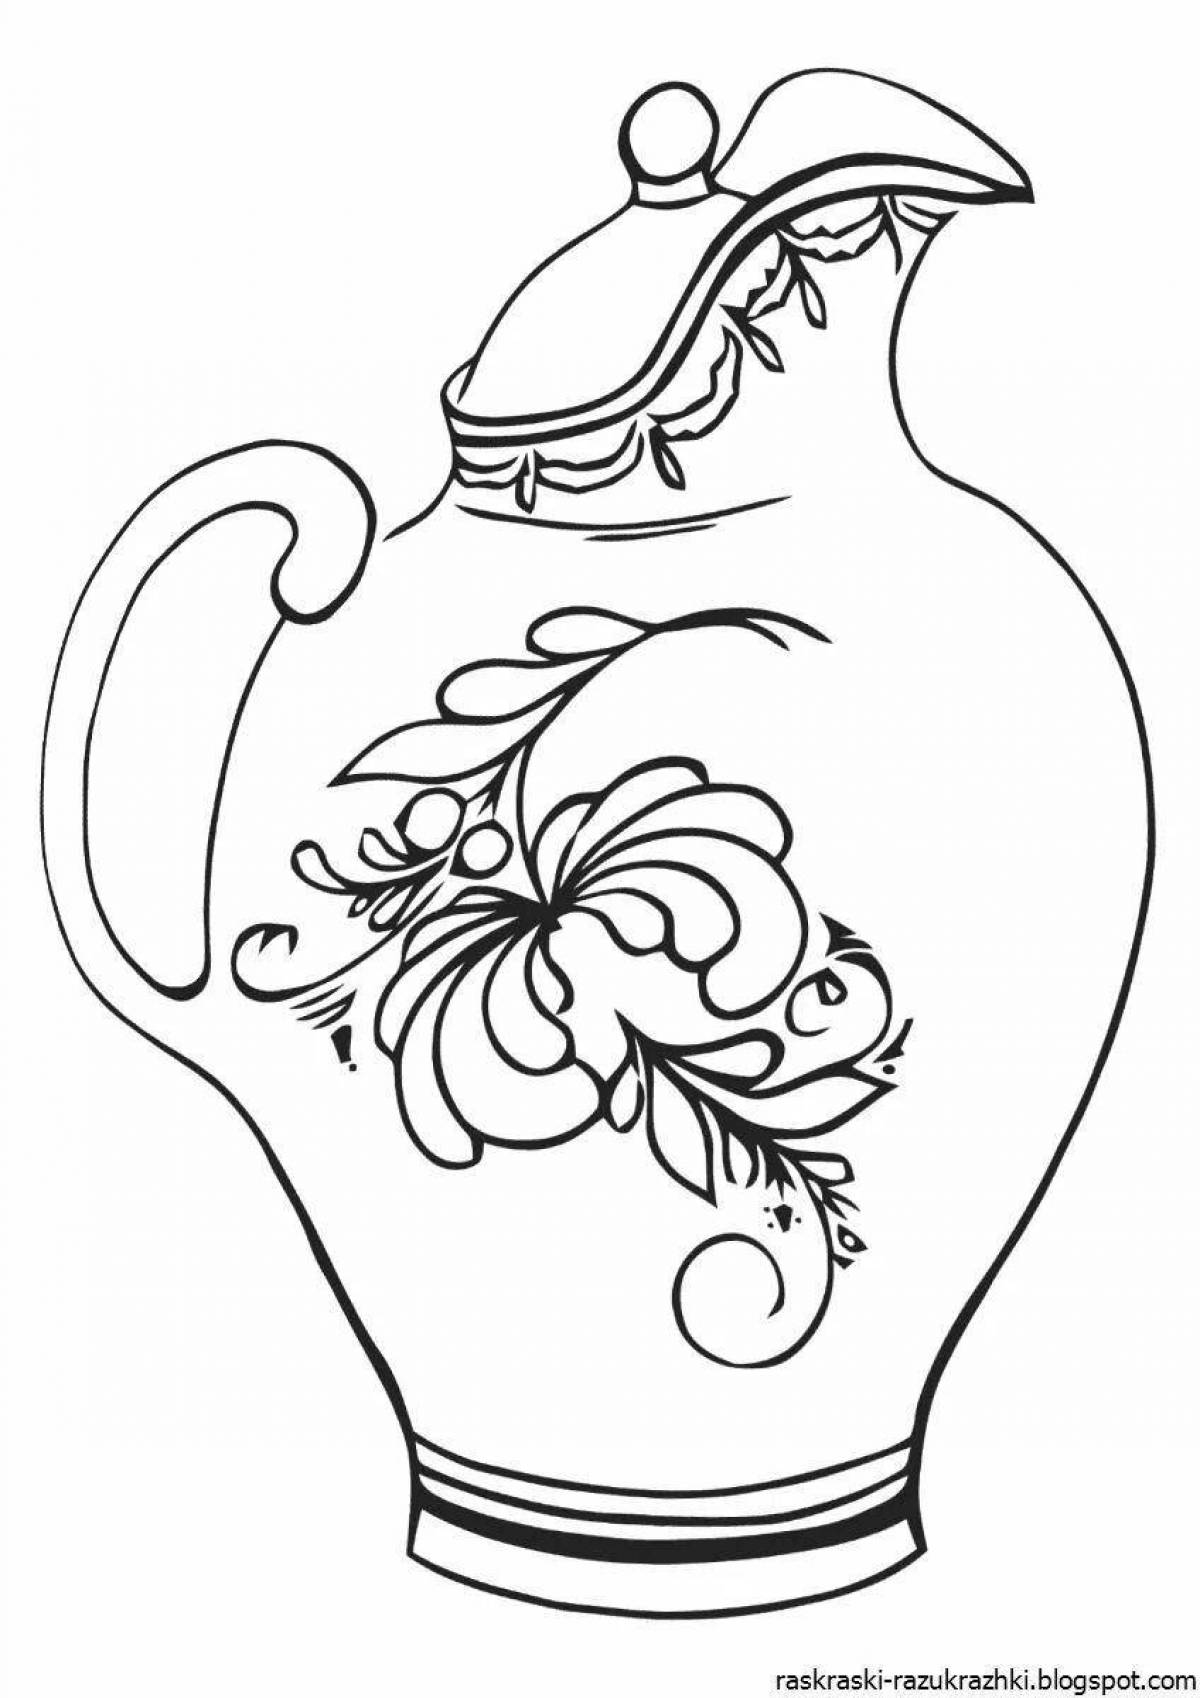 Gzhel bewitching jug coloring page